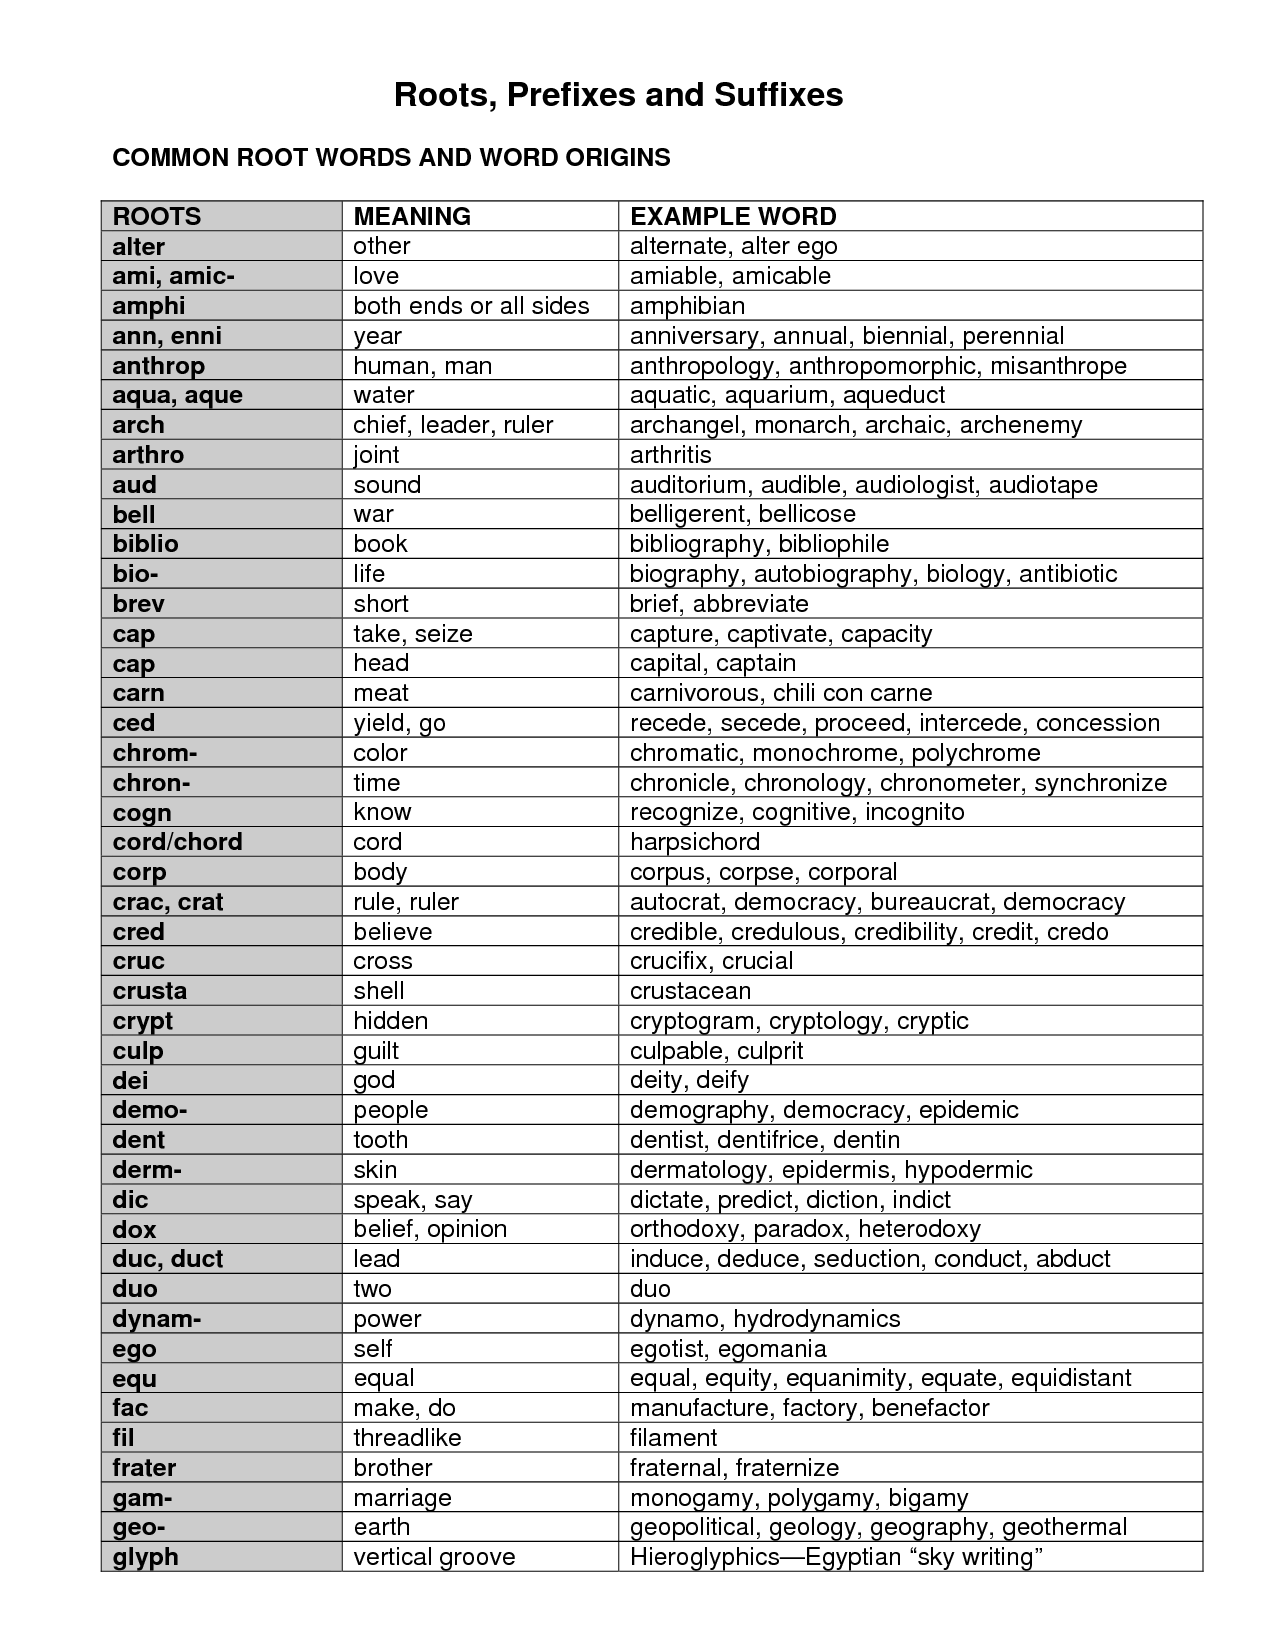 roots-prefixes-and-suffixes-chart